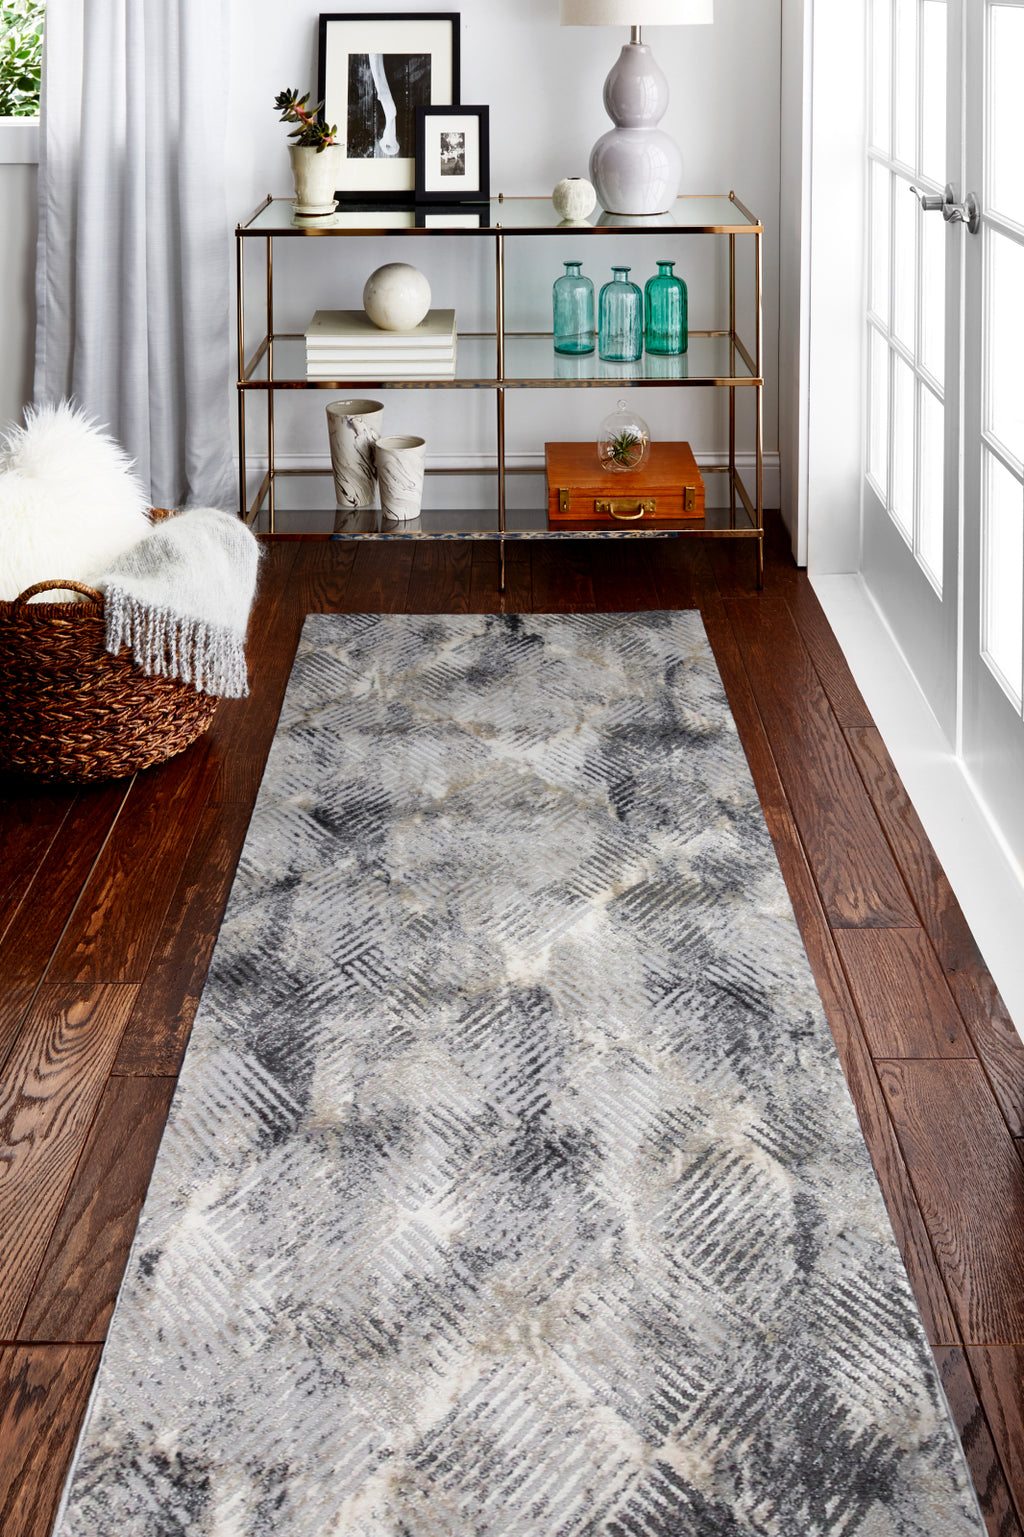 Bashian Hyannis H116-HY103 Area Rug Lifestyle Image Feature